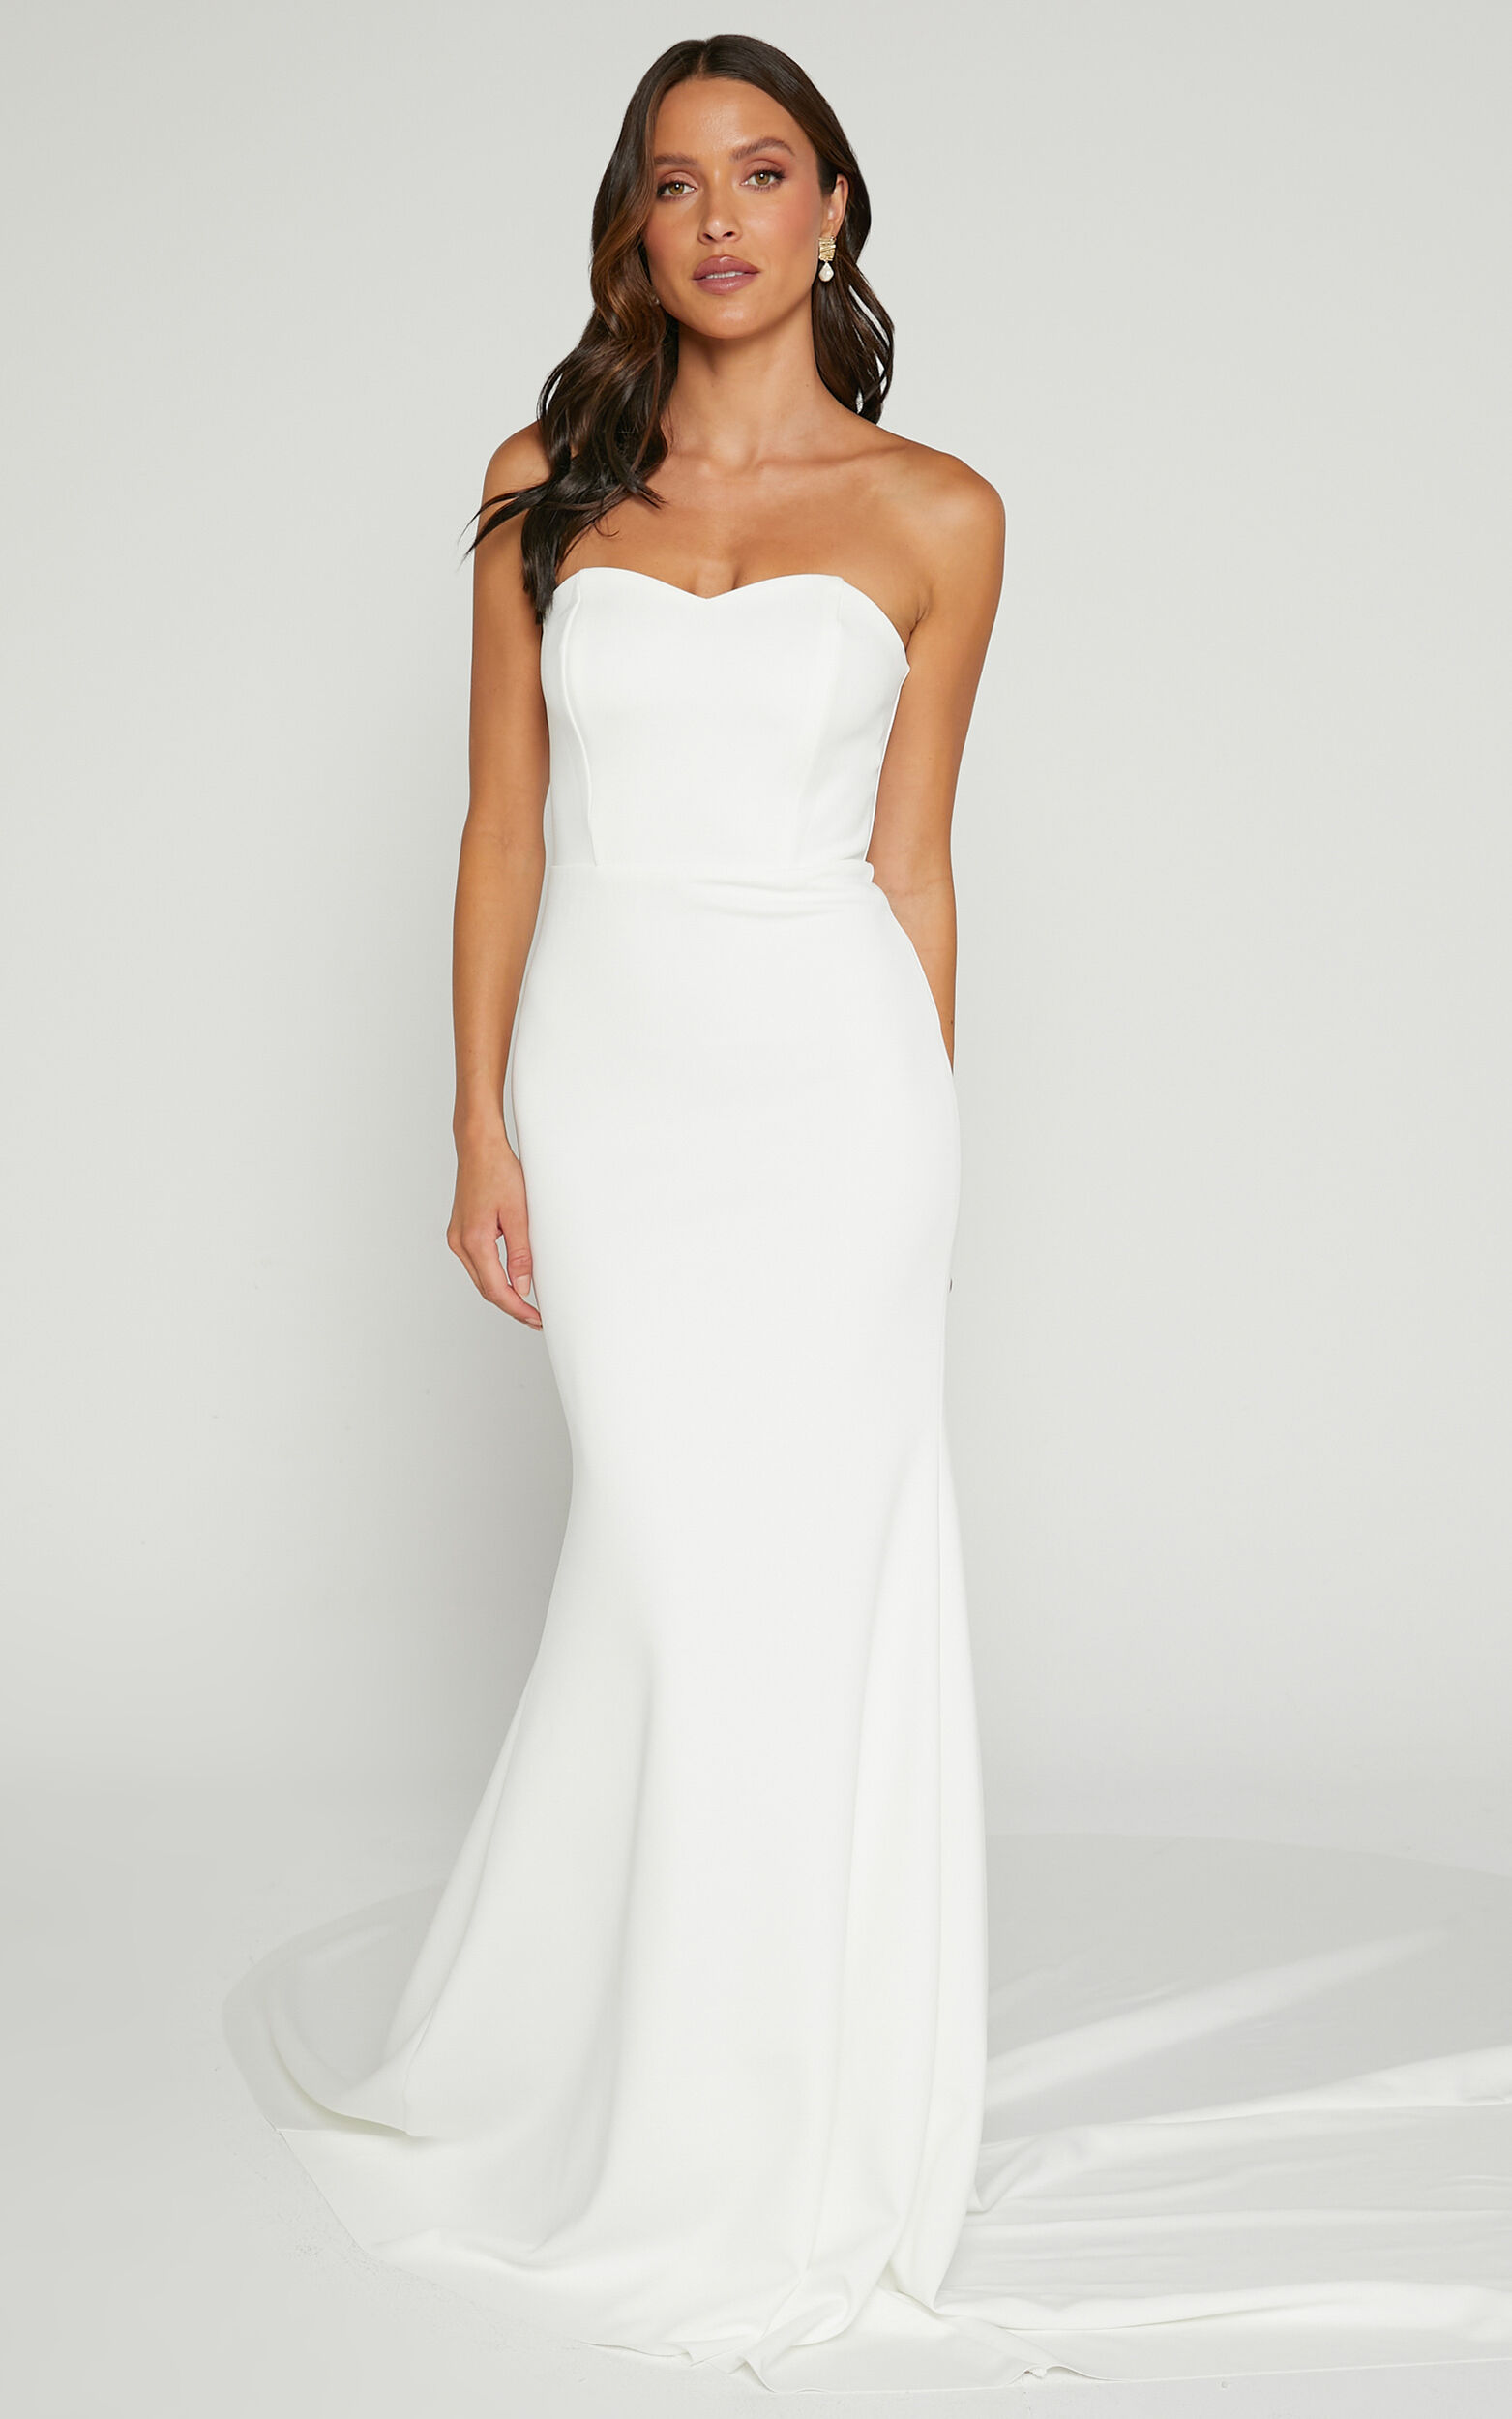 VOWS FOR LIFE BRIDAL GOWN - STRAPLESS MERMAID GOWN IN WHITE